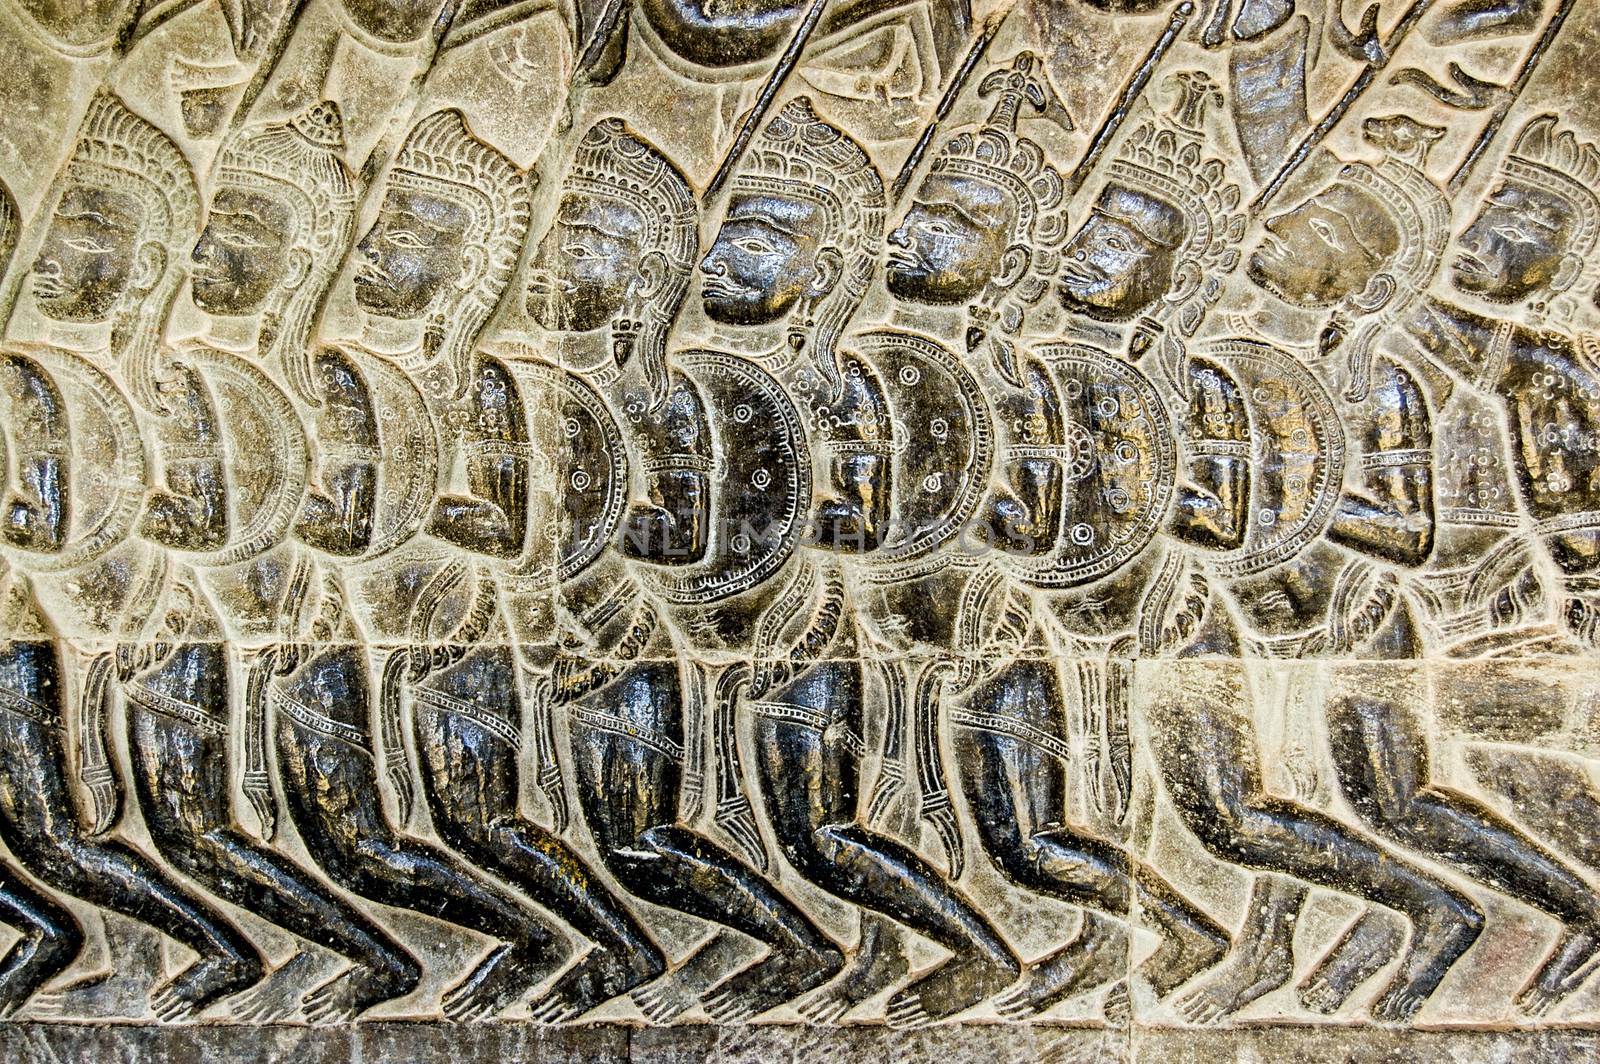 Bas relief of Pandava soldiers marching to the Battle of Kurukshetra as described in the Mahabharata. Eleventh century carving, wall of Angkor Wat temple, Siem Reap, Cambodia.